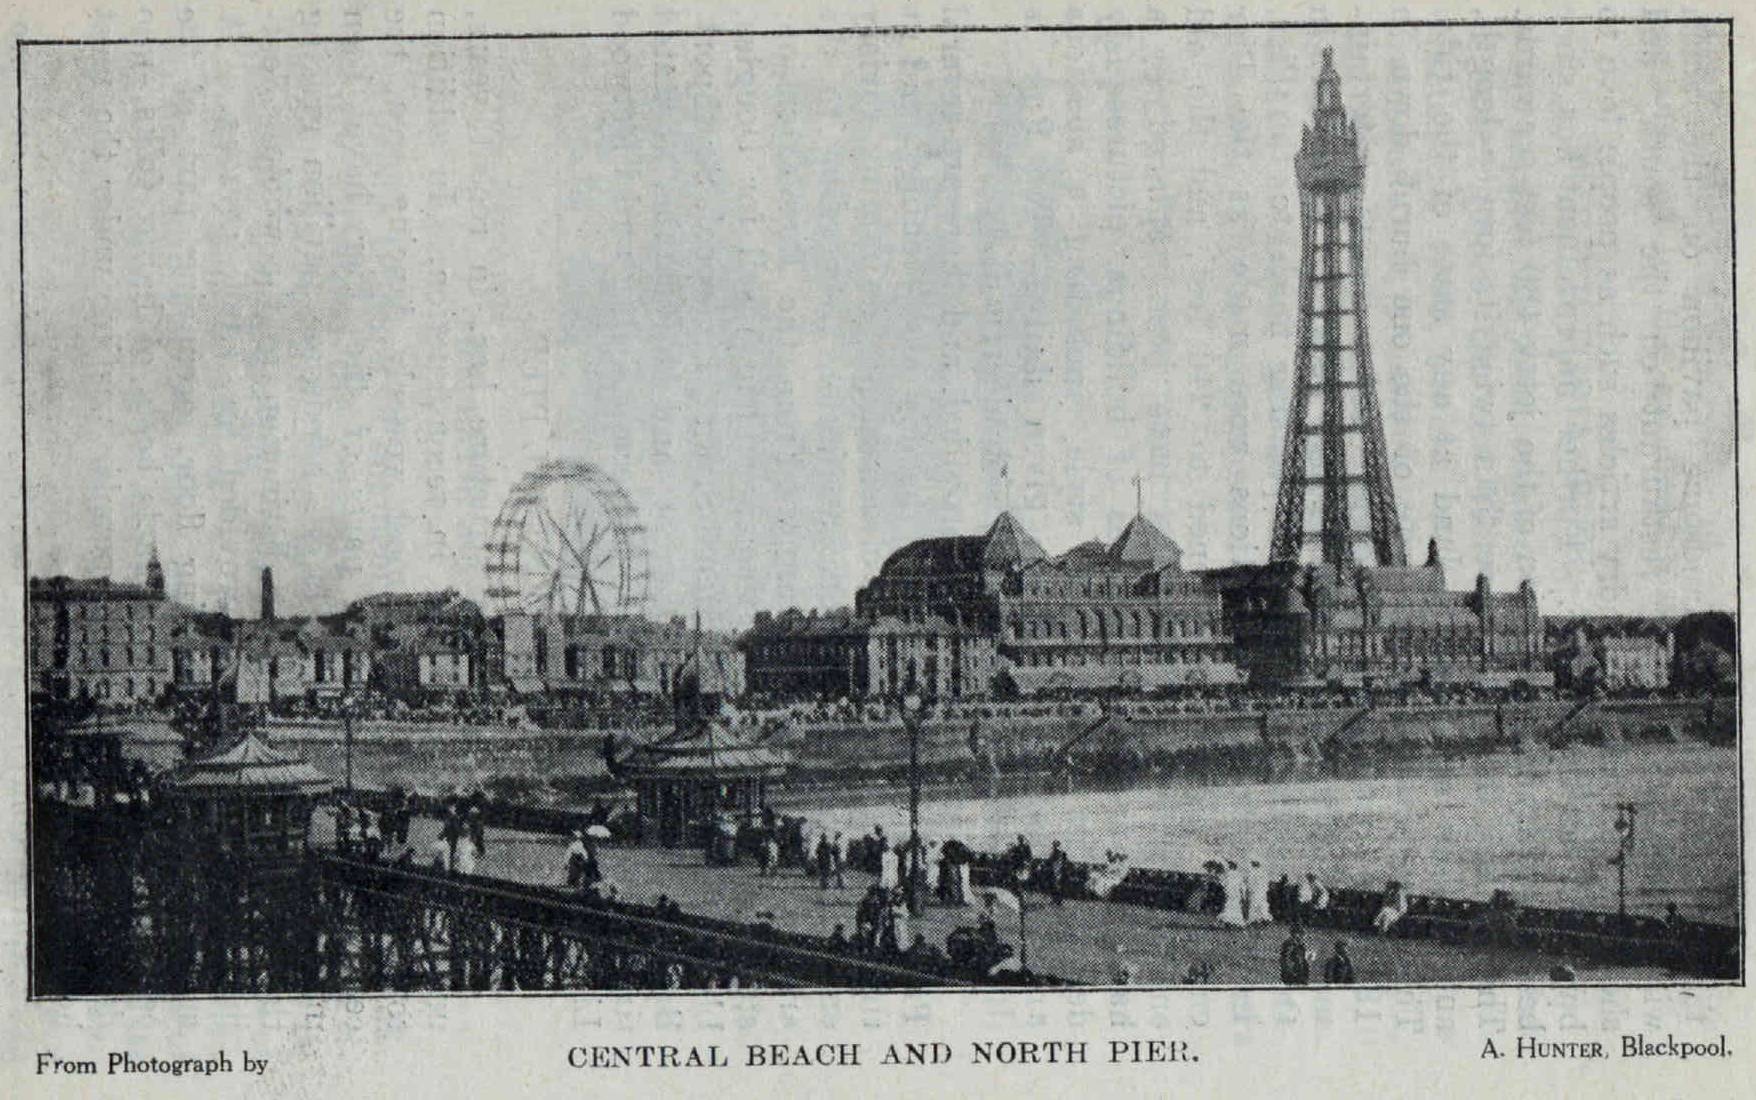 Central Beach and North Pier